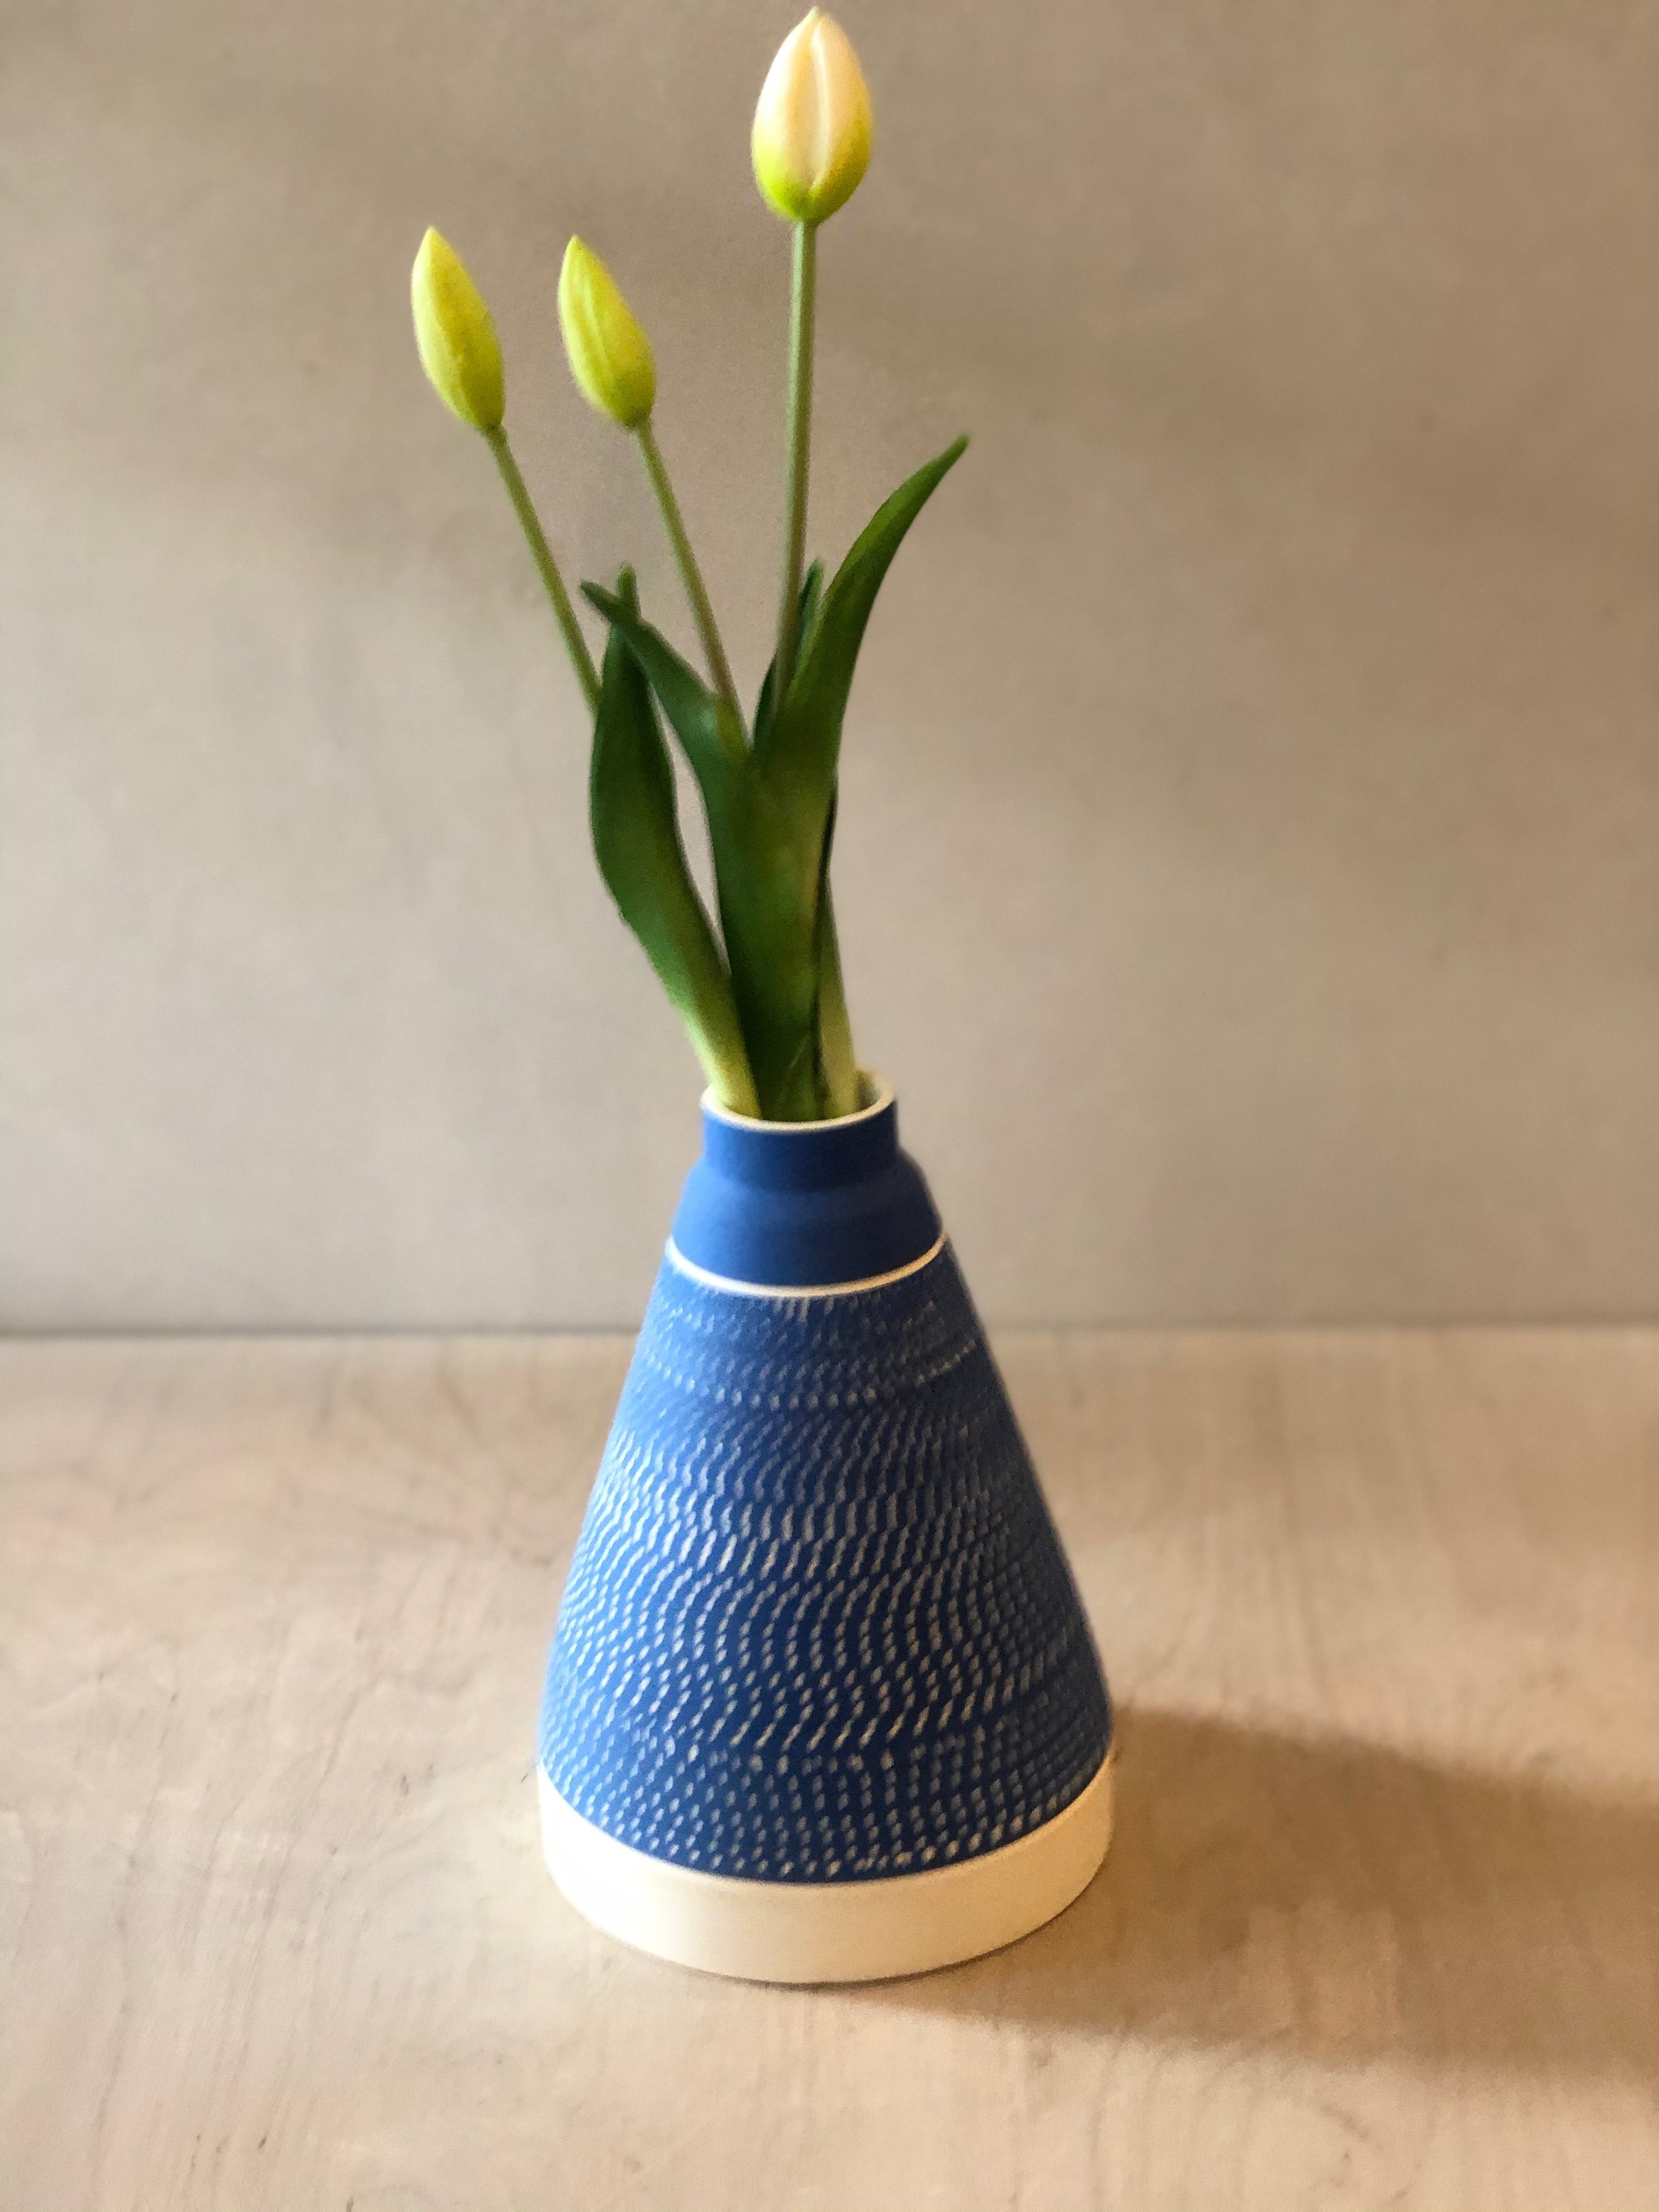 Tall blue pyramid vase with chattering decoration